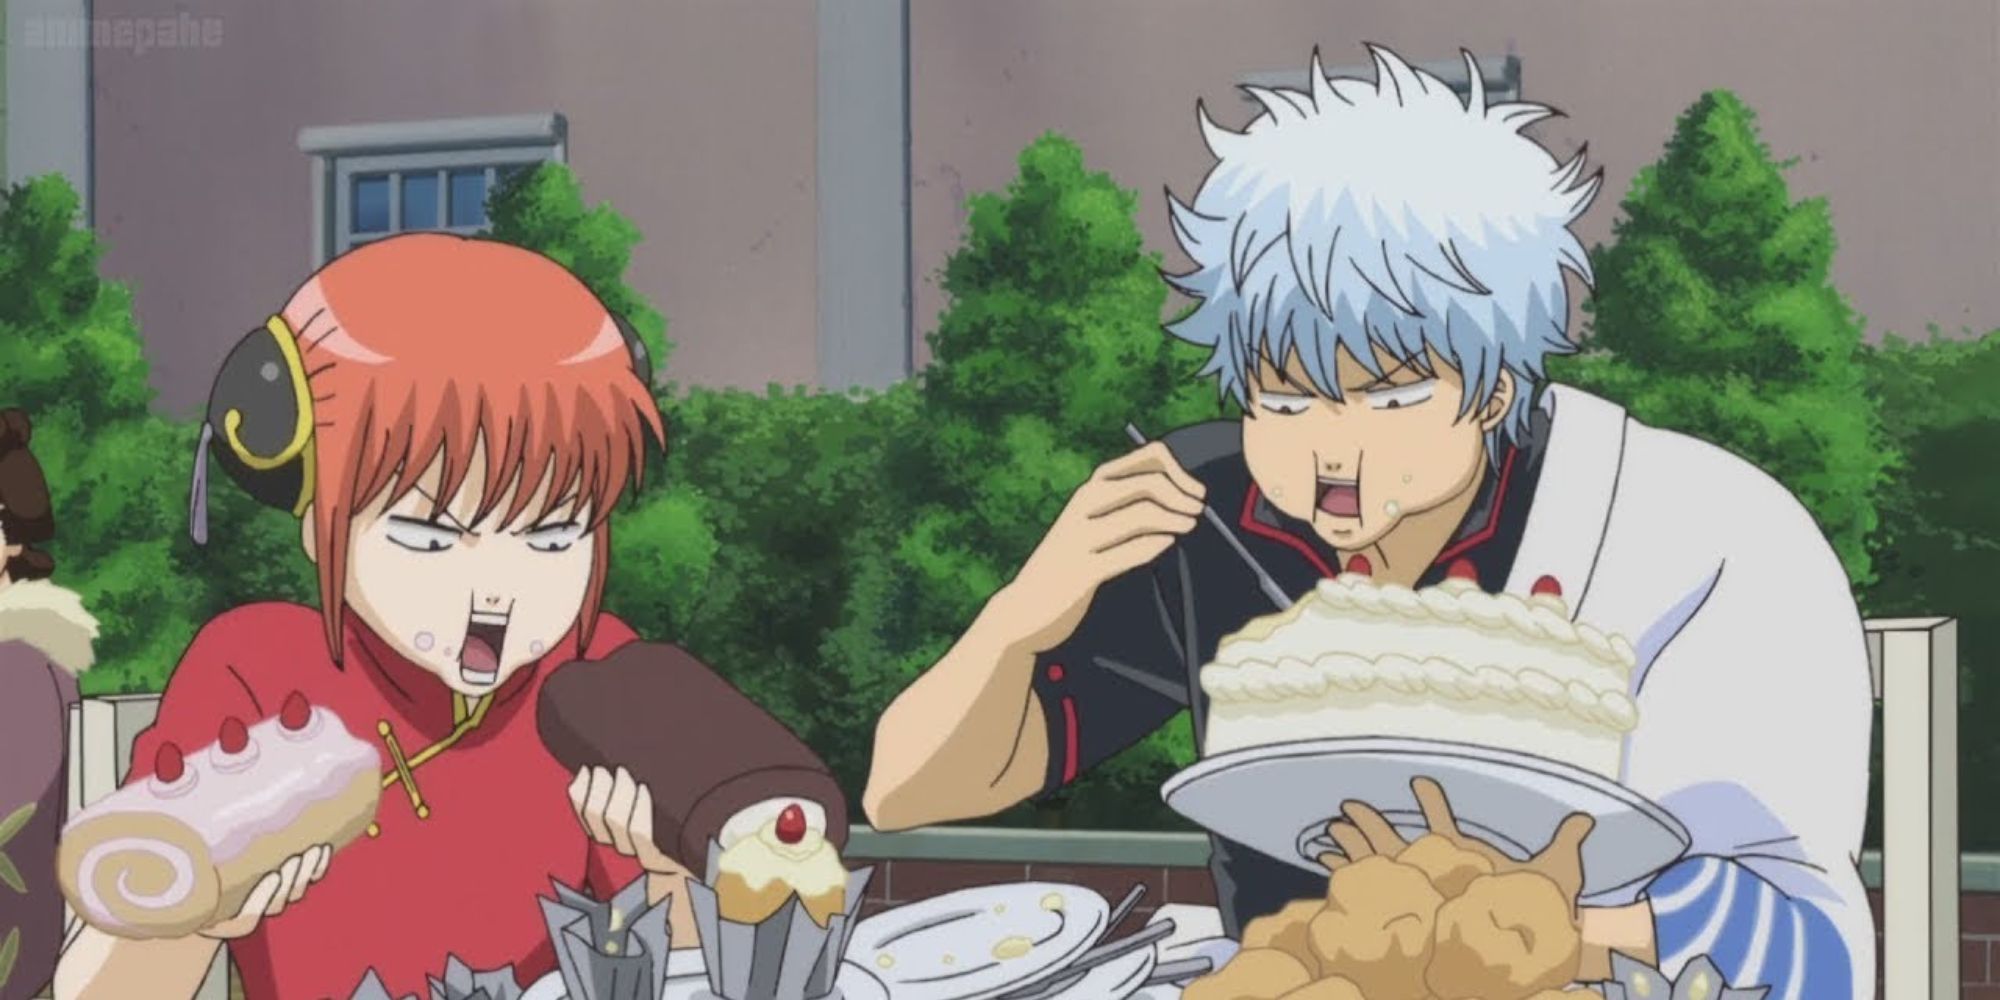 Gintoki and Kagura eating tons of sweets and desserts in Gintama